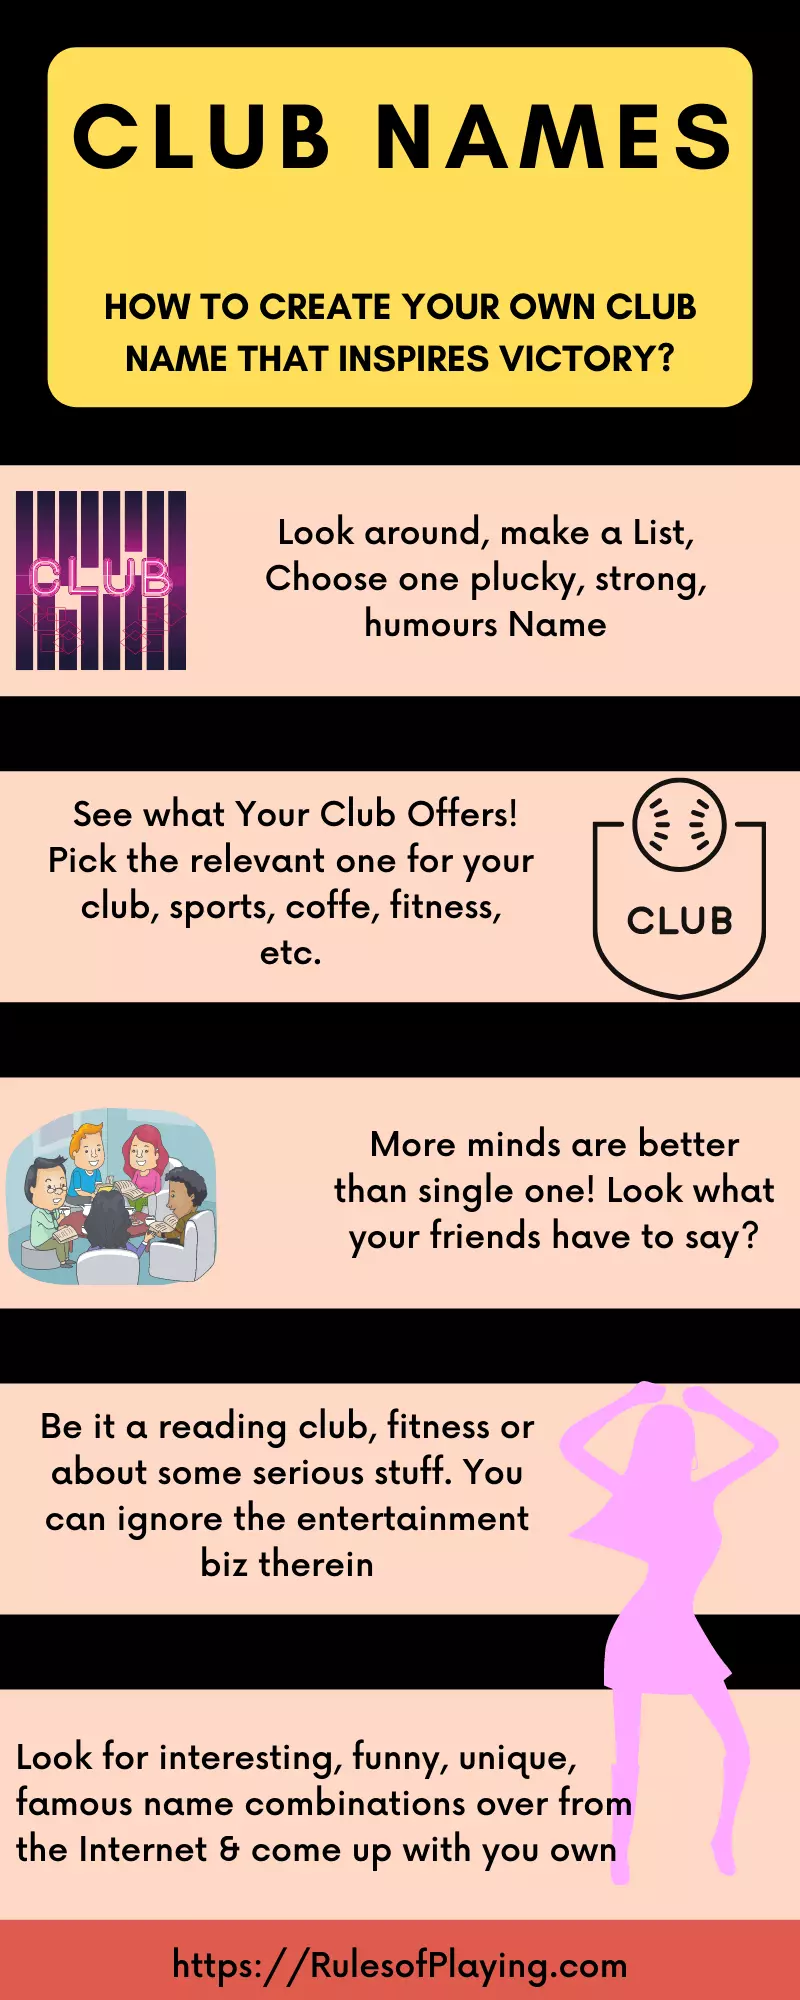 Club Names- how to create your own club name?